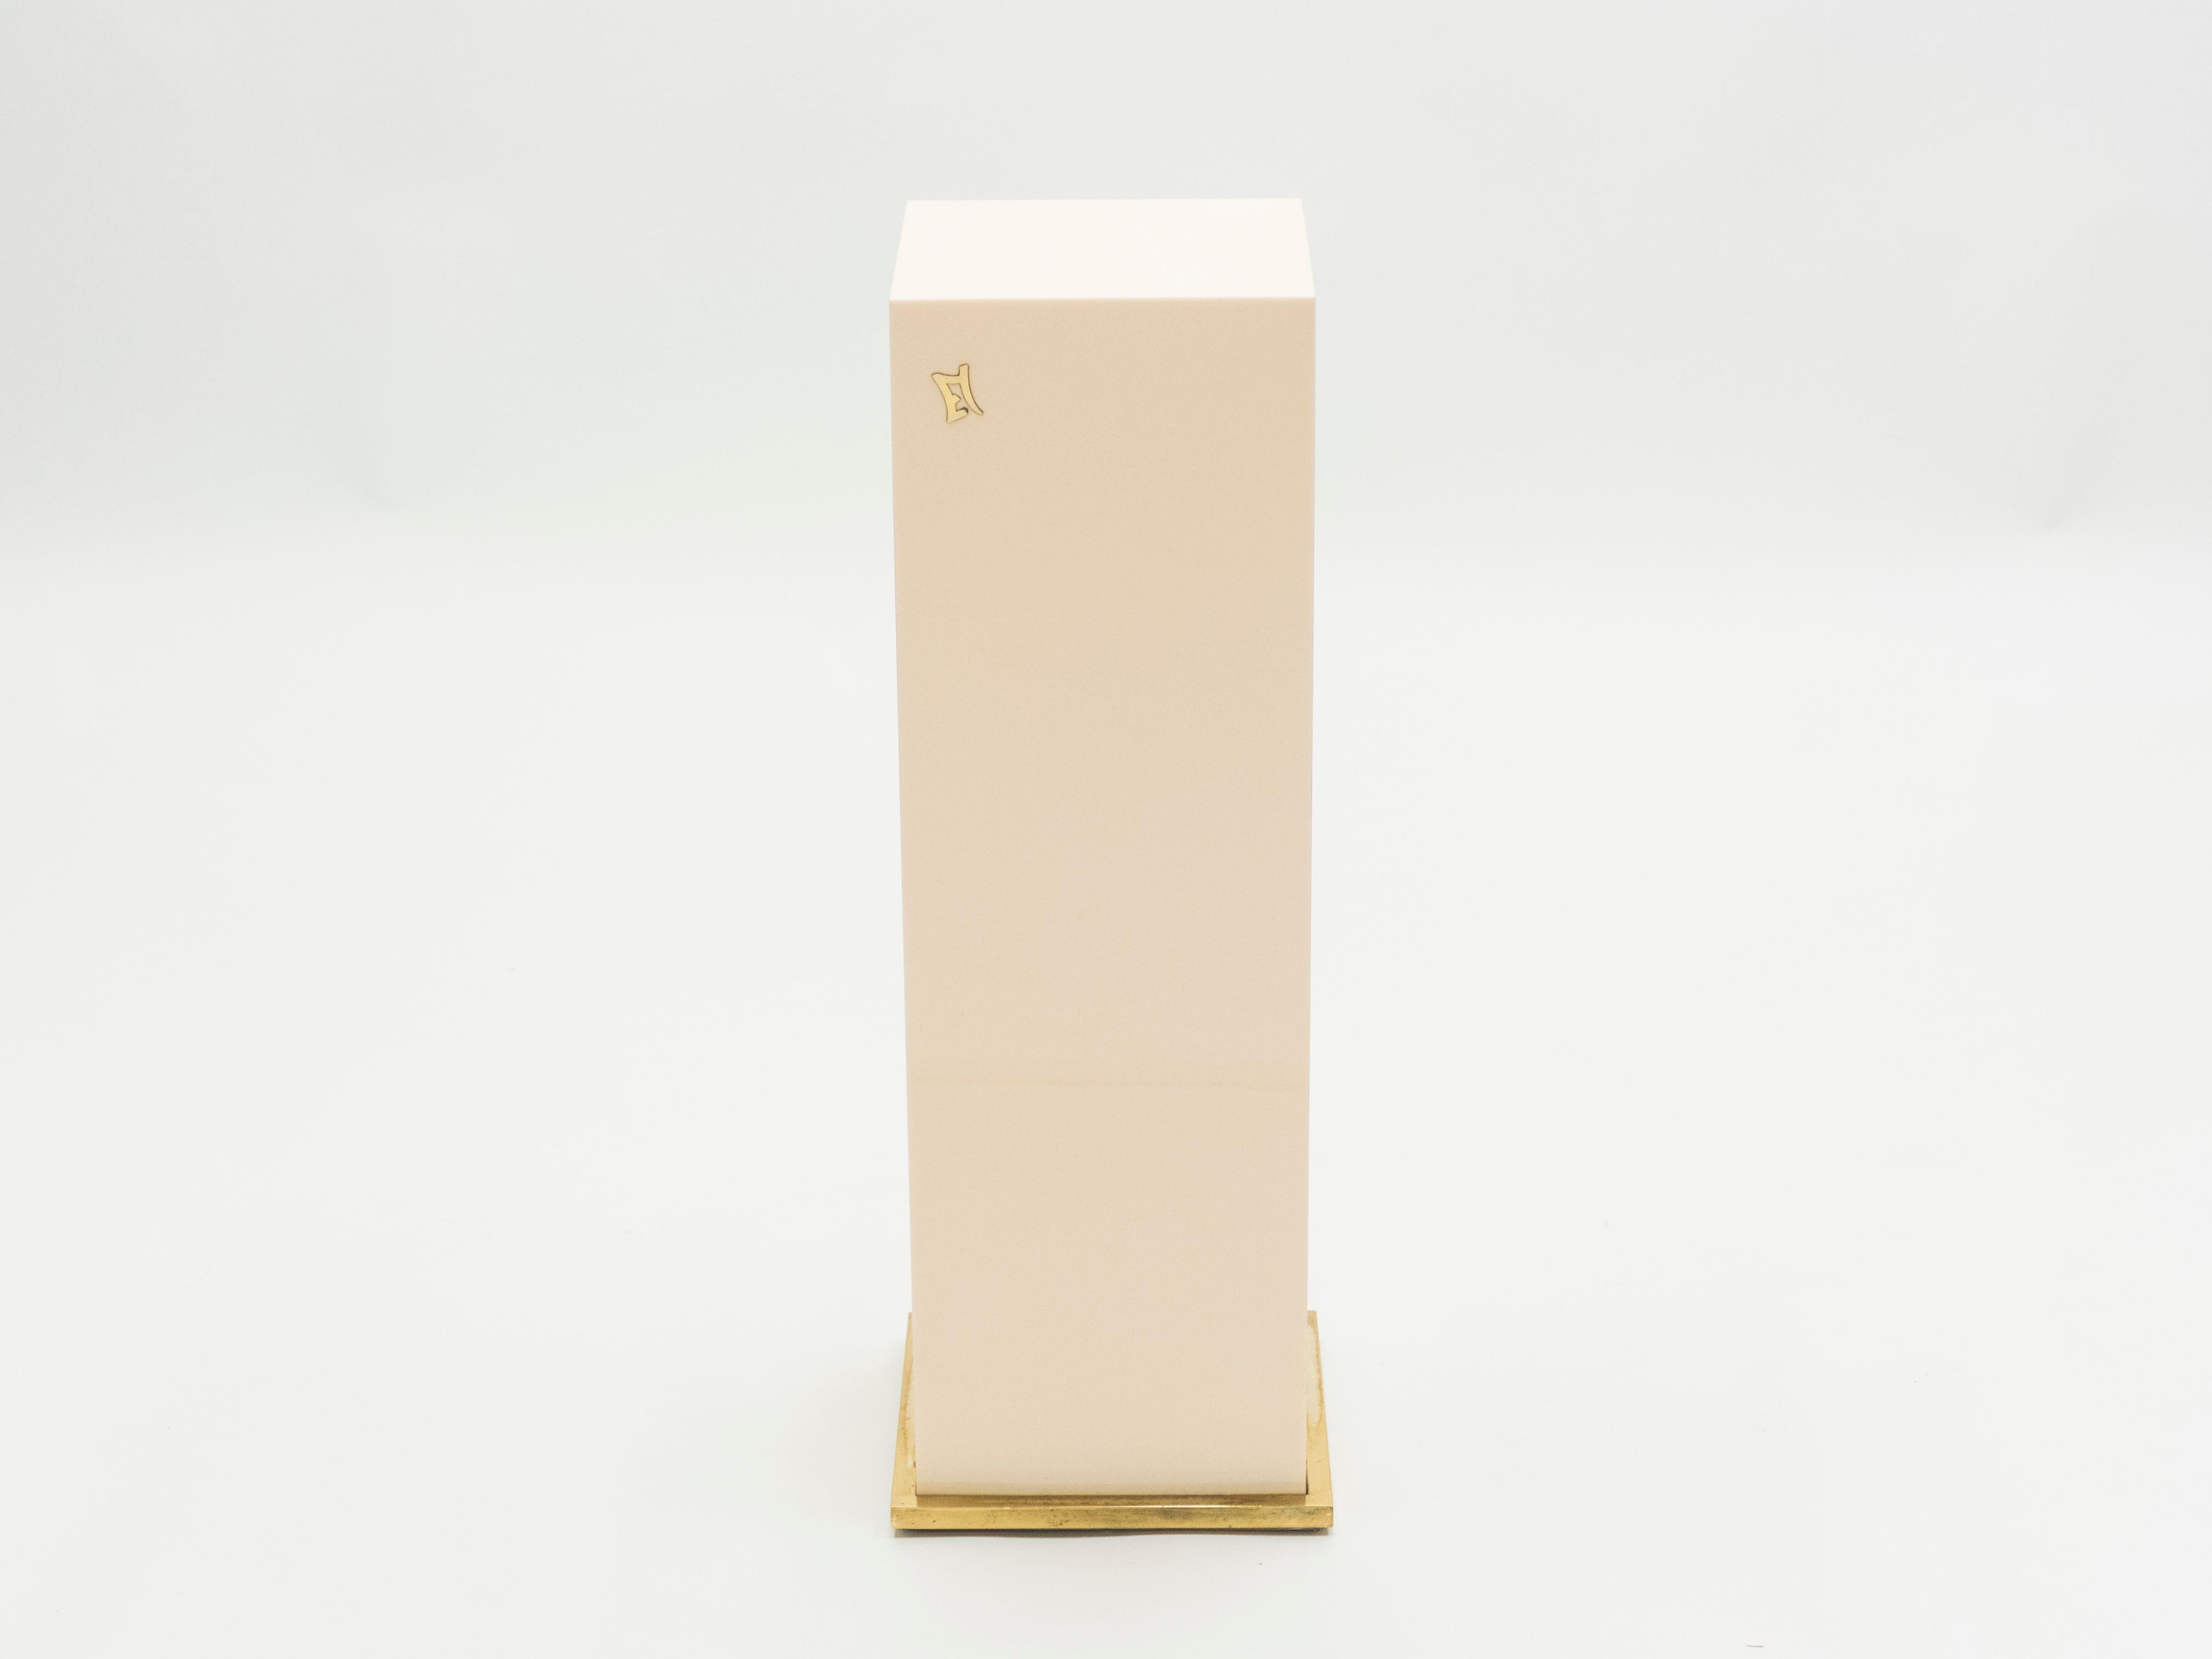 Minimalist and chic, this cubic pedestal tables are both unusual and sleek, serving as understated and anchoring pieces for your living room. The surface is a creamy white lacquer, which rests on a brass base: a color scheme that feels inherently